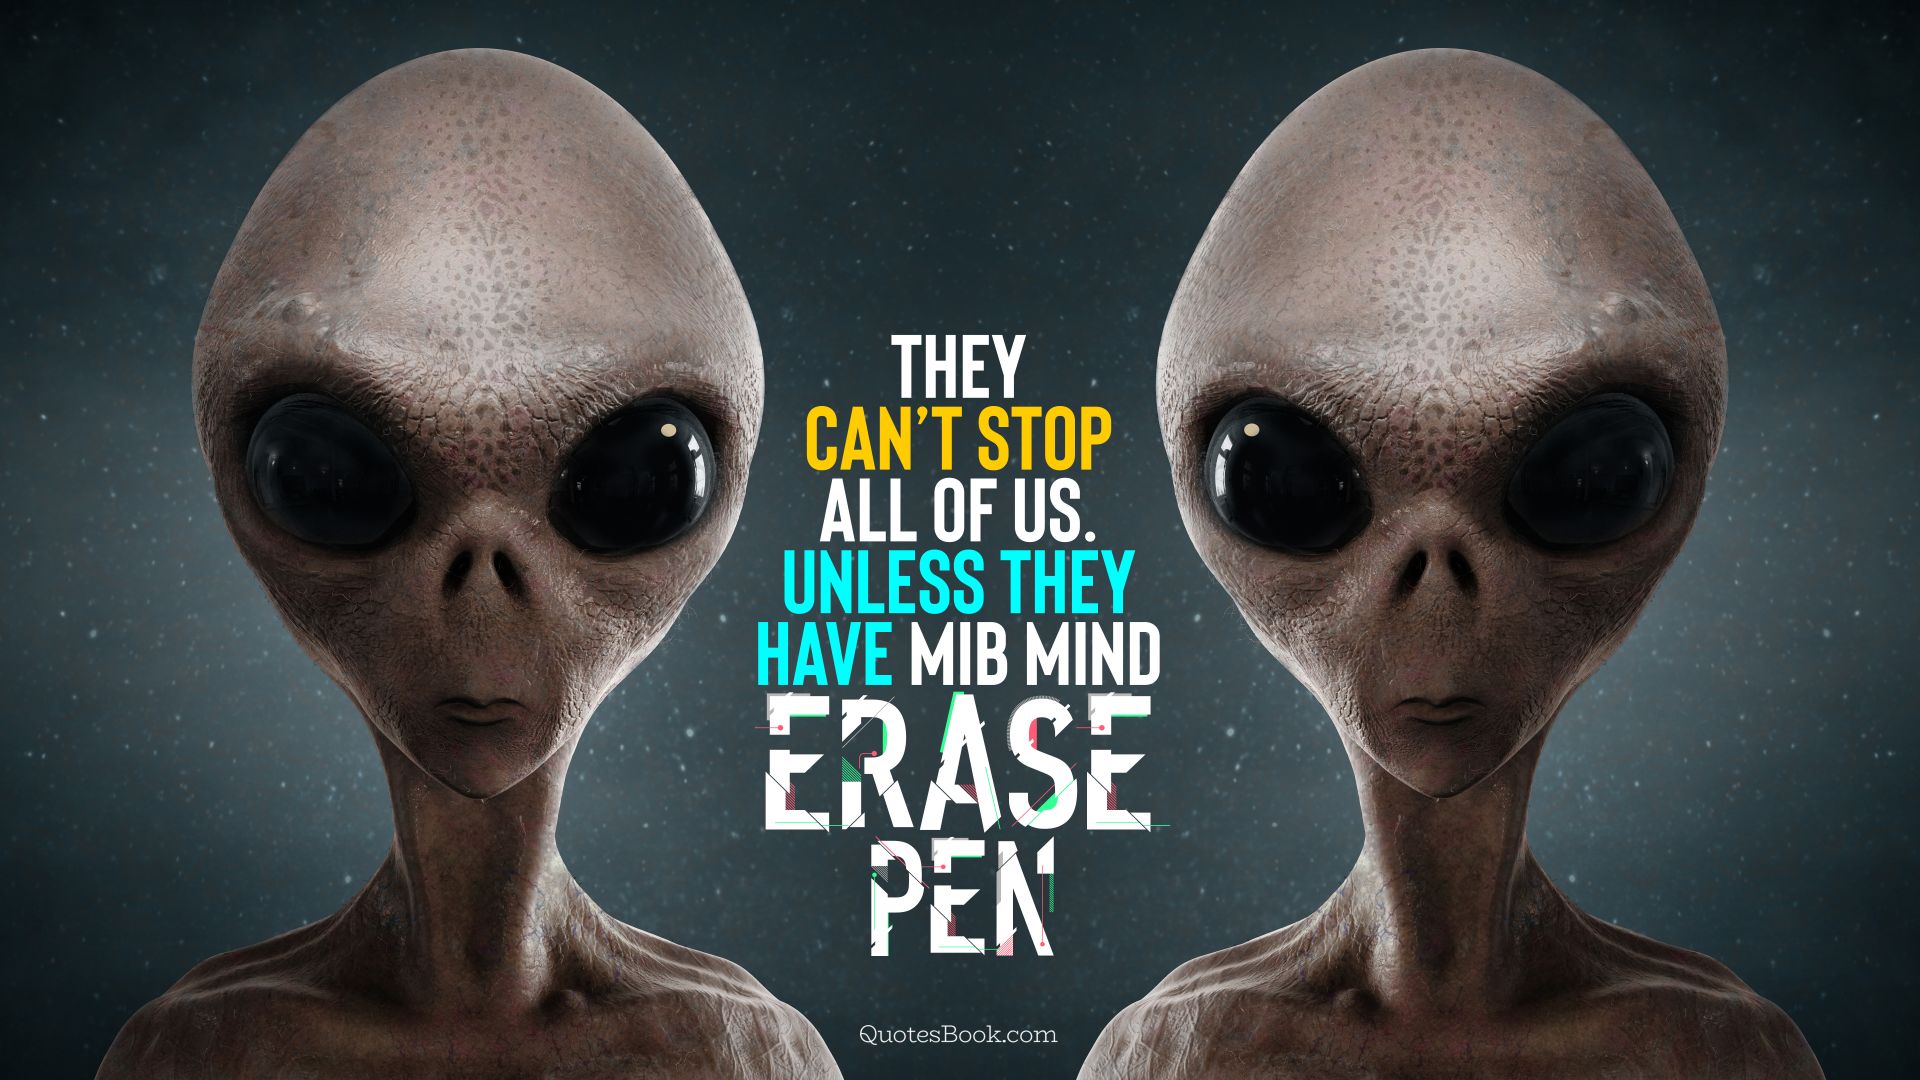 They can’t stop all of us. Unless they have MIB mind erase pen